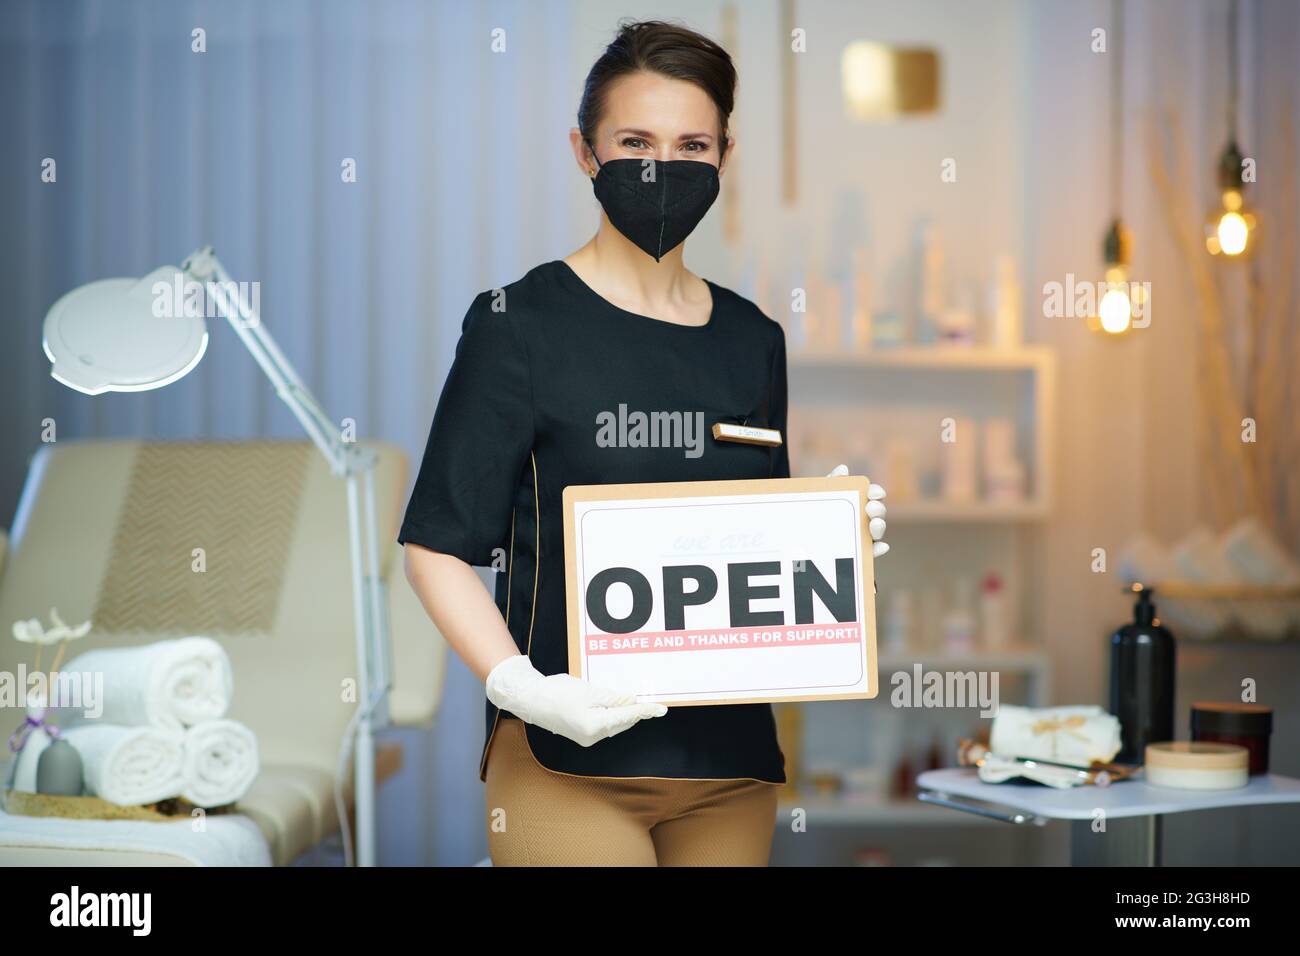 Business during coronavirus pandemic. woman worker with ffp2 mask and open sign in modern beauty salon. Stock Photo